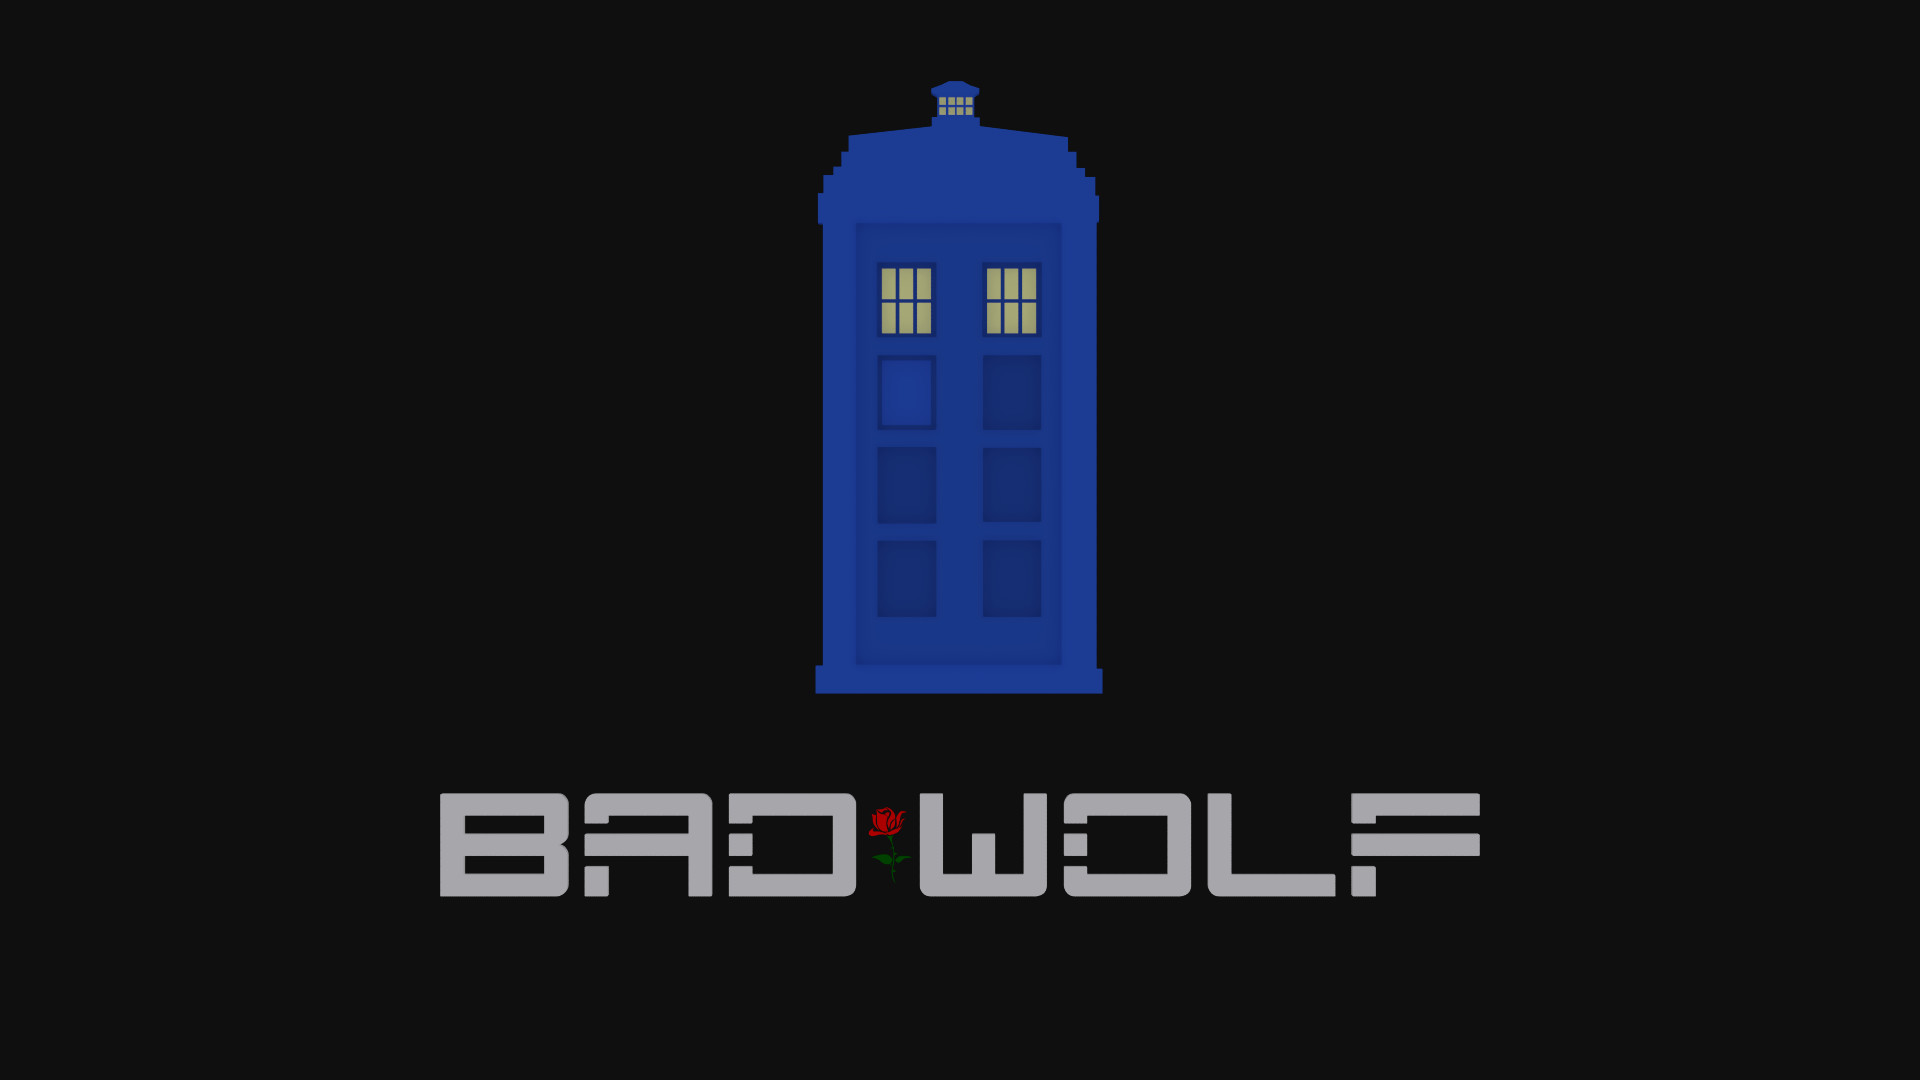 Doctor Who Rose Bad Wolf wallpaper Cool Desktop Wallpaper Pinterest Bad wolf, Tardis and Wallpaper